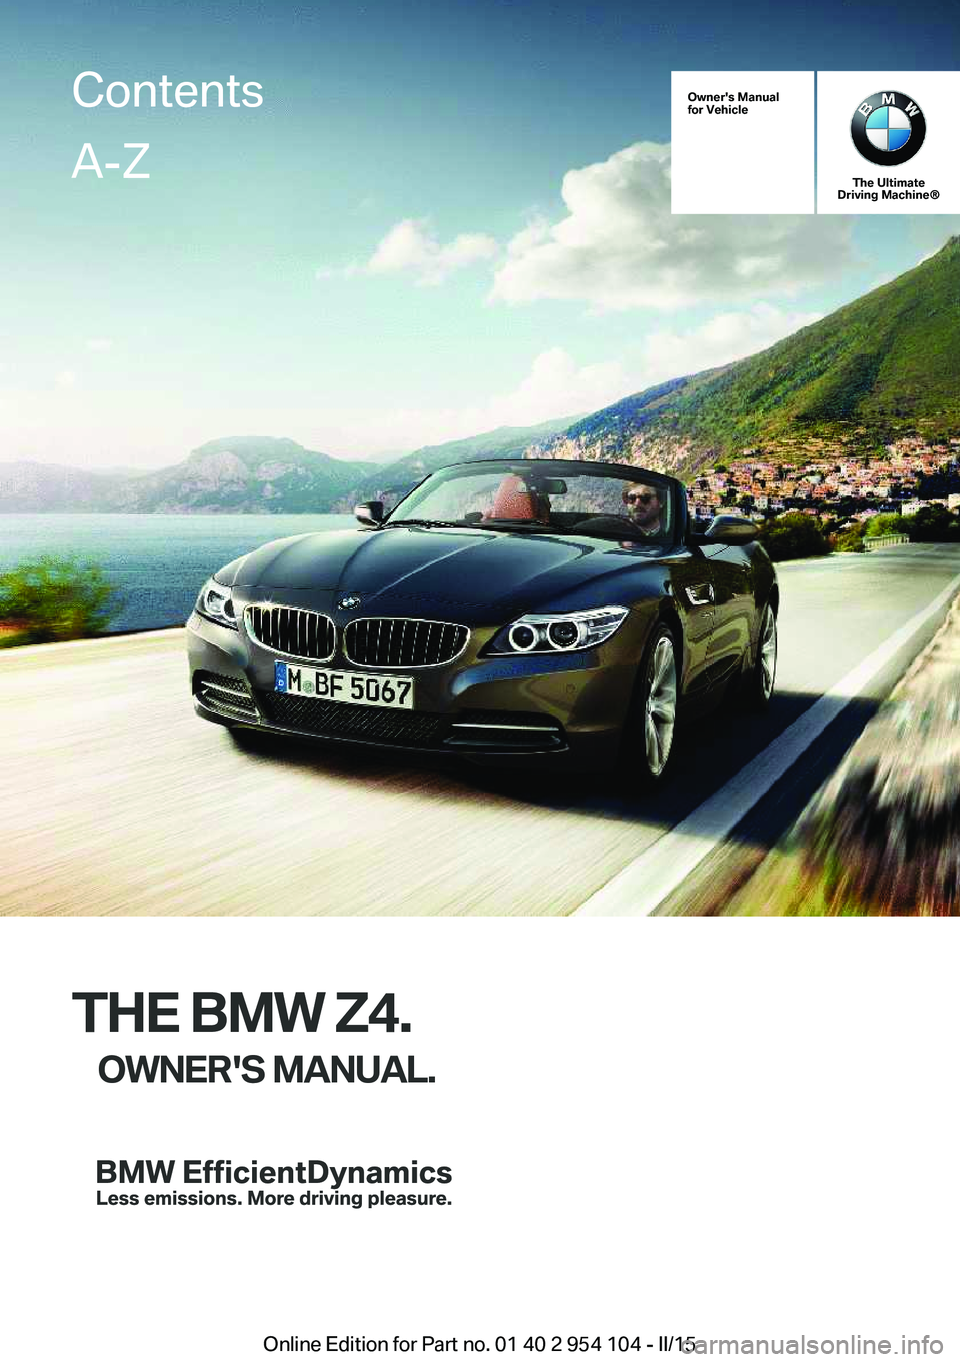 BMW Z4 SDRIVE35IS 2015  Owners Manual Owner's Manual
for Vehicle
The Ultimate
Driving Machine®
THE BMW Z4.
OWNER'S MANUAL.
ContentsA-Z
Online Edition for Part no. 01 40 2 954 104 - II/15   